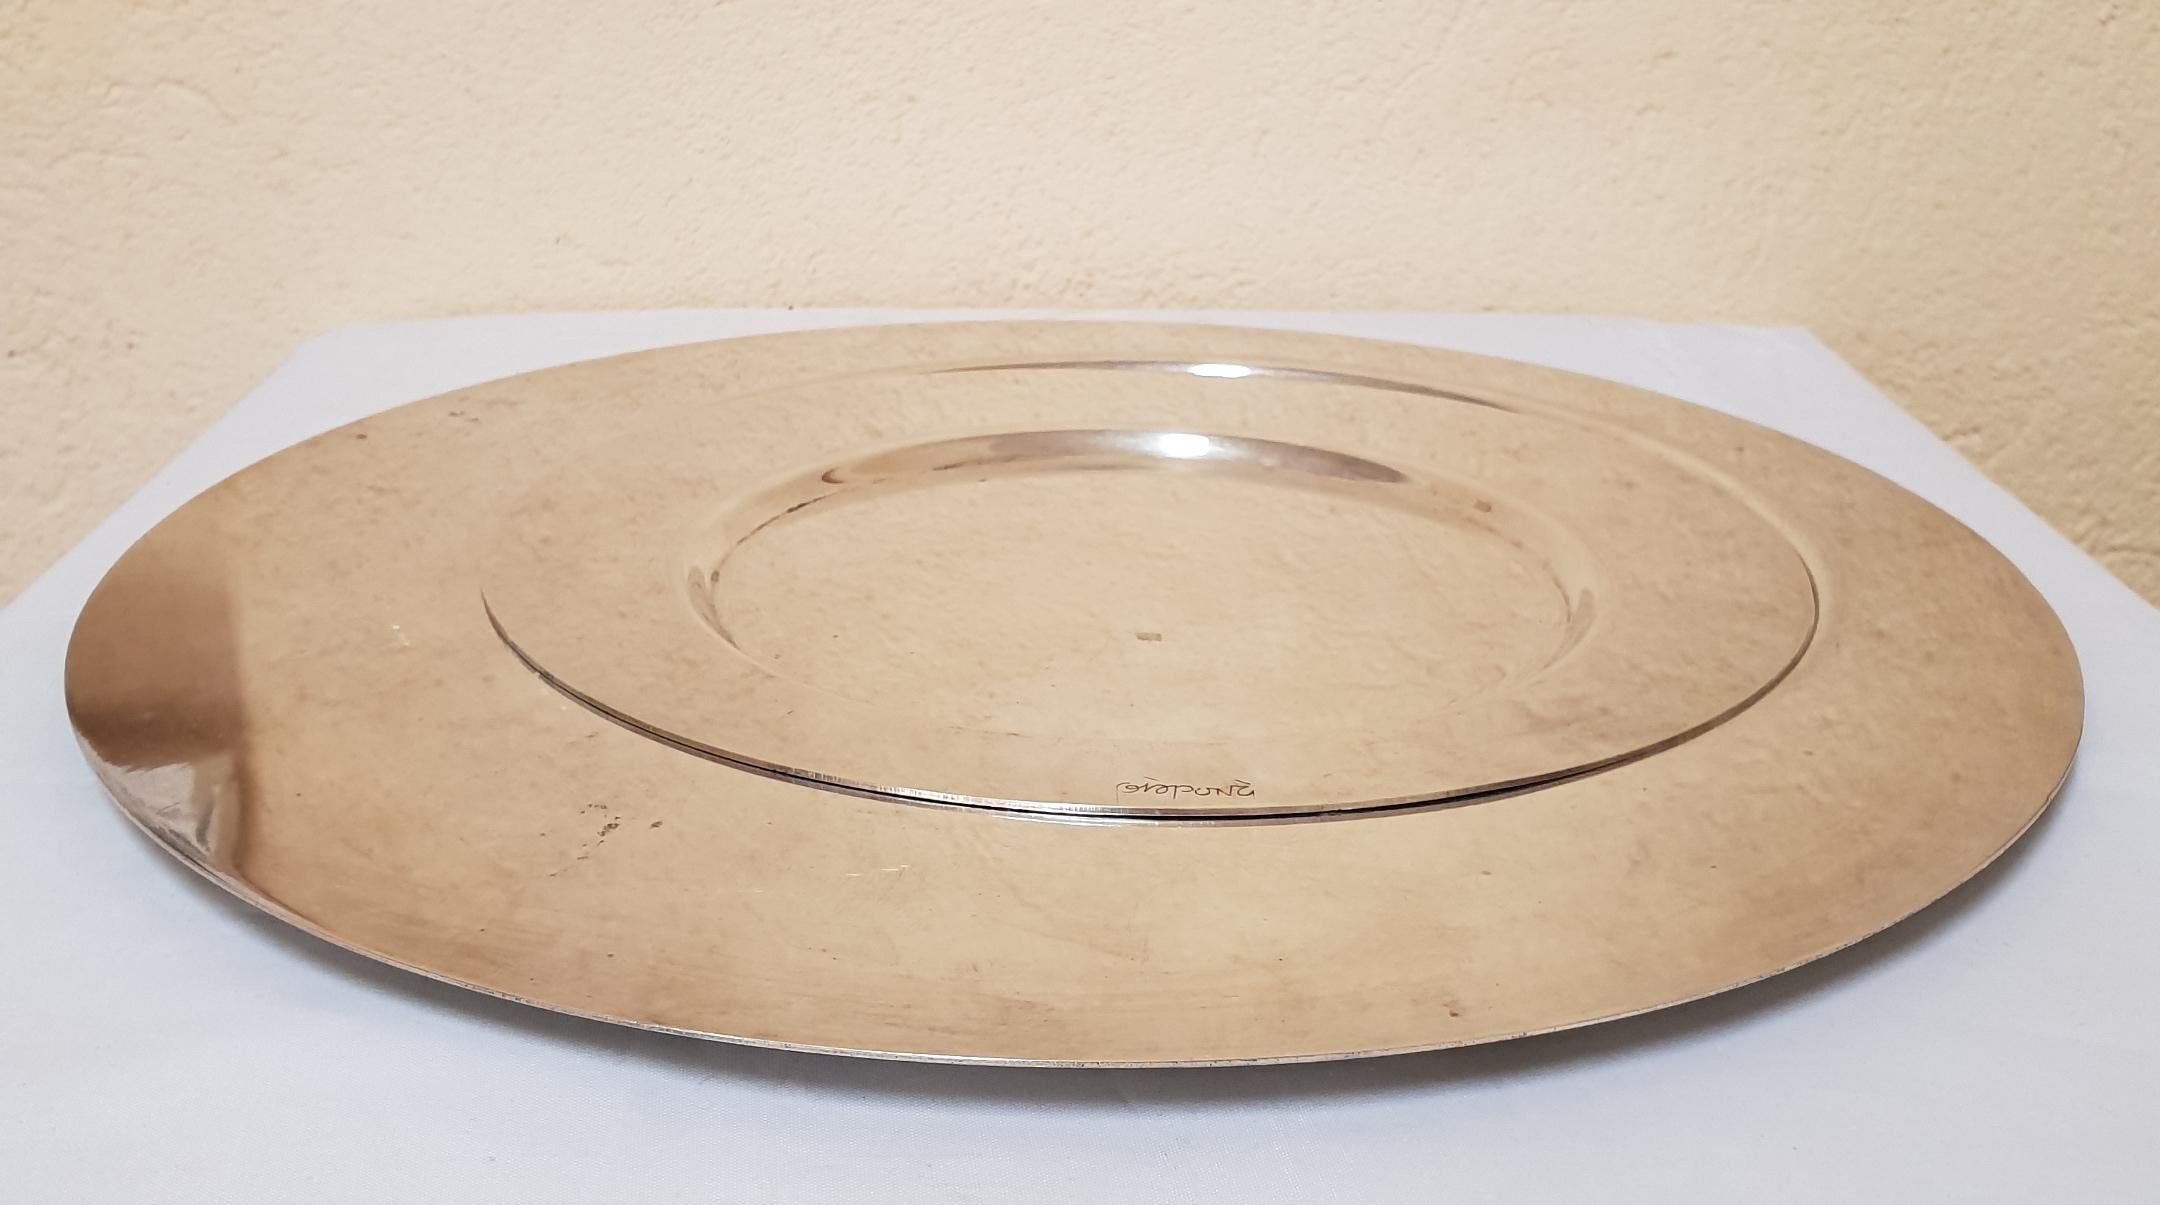 2 original metal dishes in 2 differents dimentions, made to put one inside the other.
Originally used as empty pocket.
signed by Giò Ponti design 
Giò Ponti was a very important italian designer who worked with M. Cleto Munari for the production of